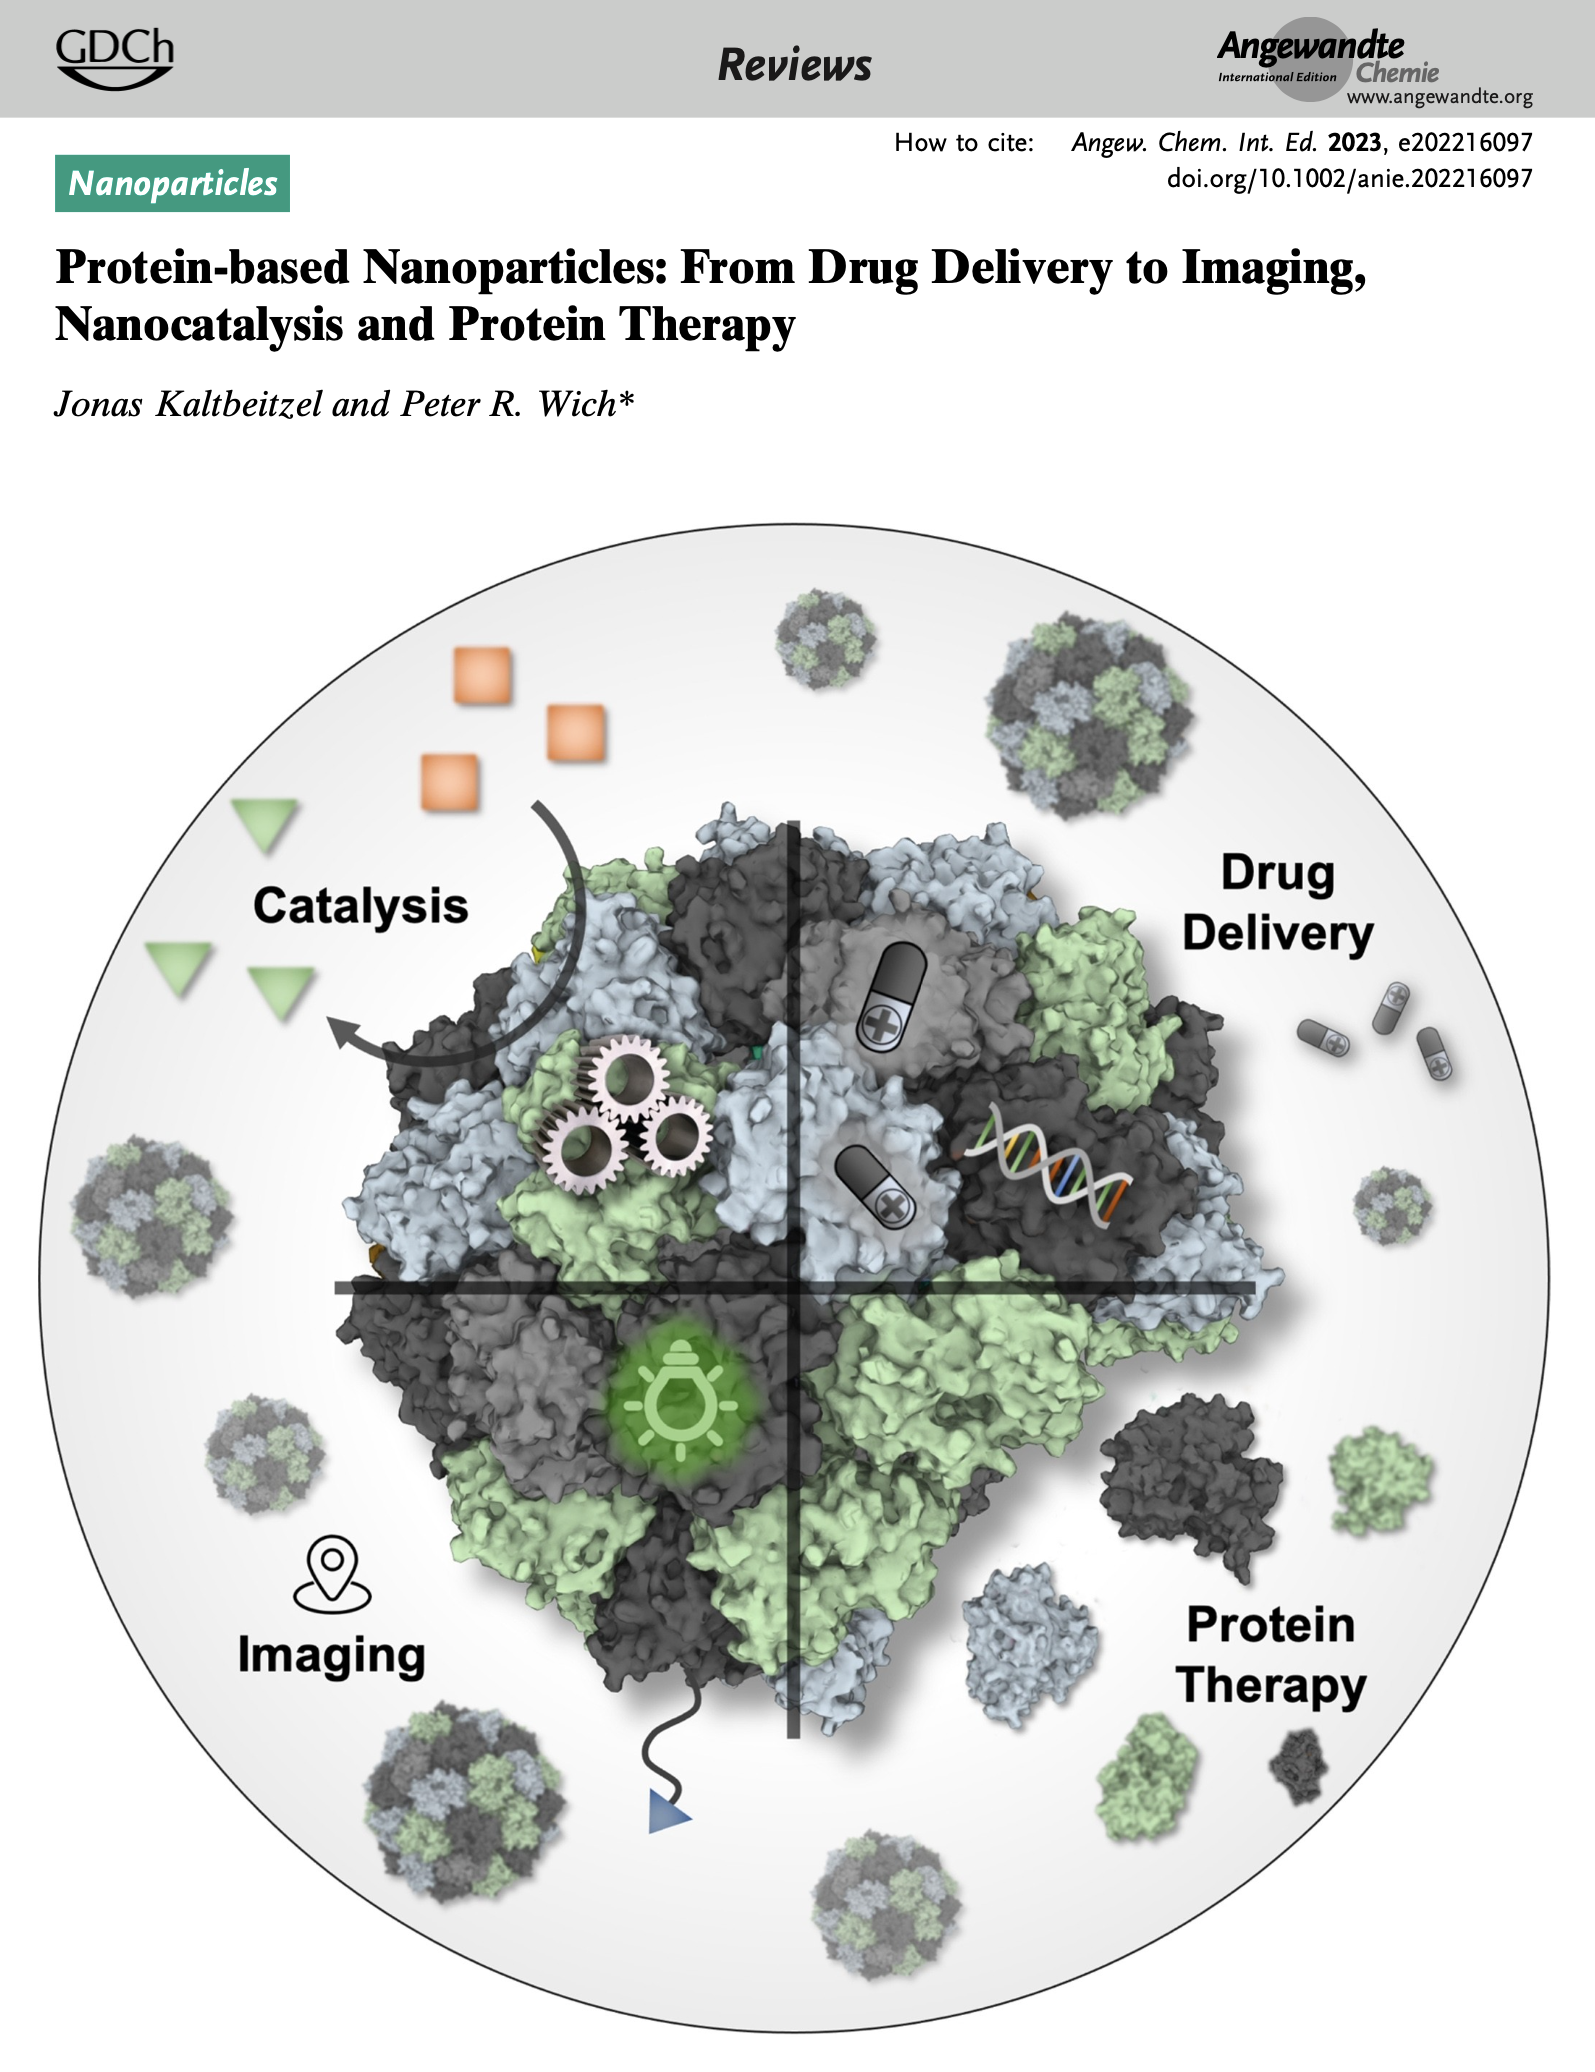 Protein-based Nanoparticles: From Drug Delivery to Imaging, Nanocatalysis and Protein Therapy J. Kaltbeitzel, P. R. Wich Angew. Chem. Int. Ed. 2023, e202216097 (DOI: 10.1002/anie.202216097)